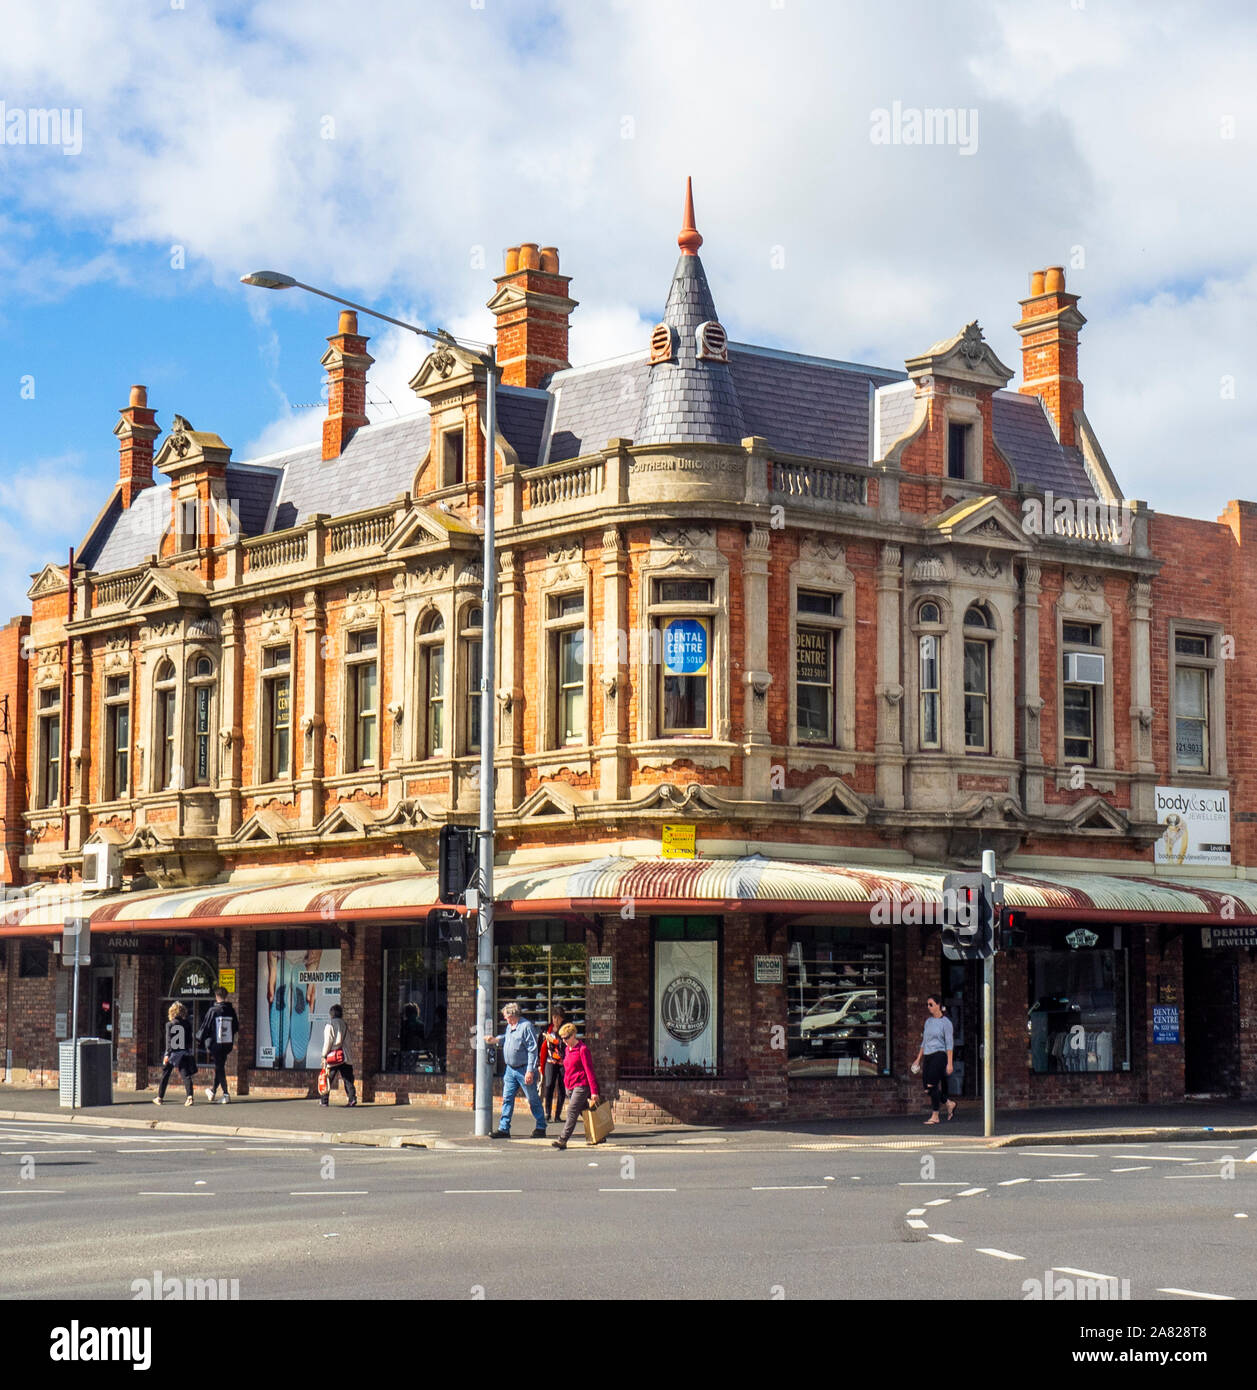 Cressy Trading Co. Building  built in English Queen Anne Revival architecture on Malop and Yarra Streets Geelong Victoria Australia. Stock Photo